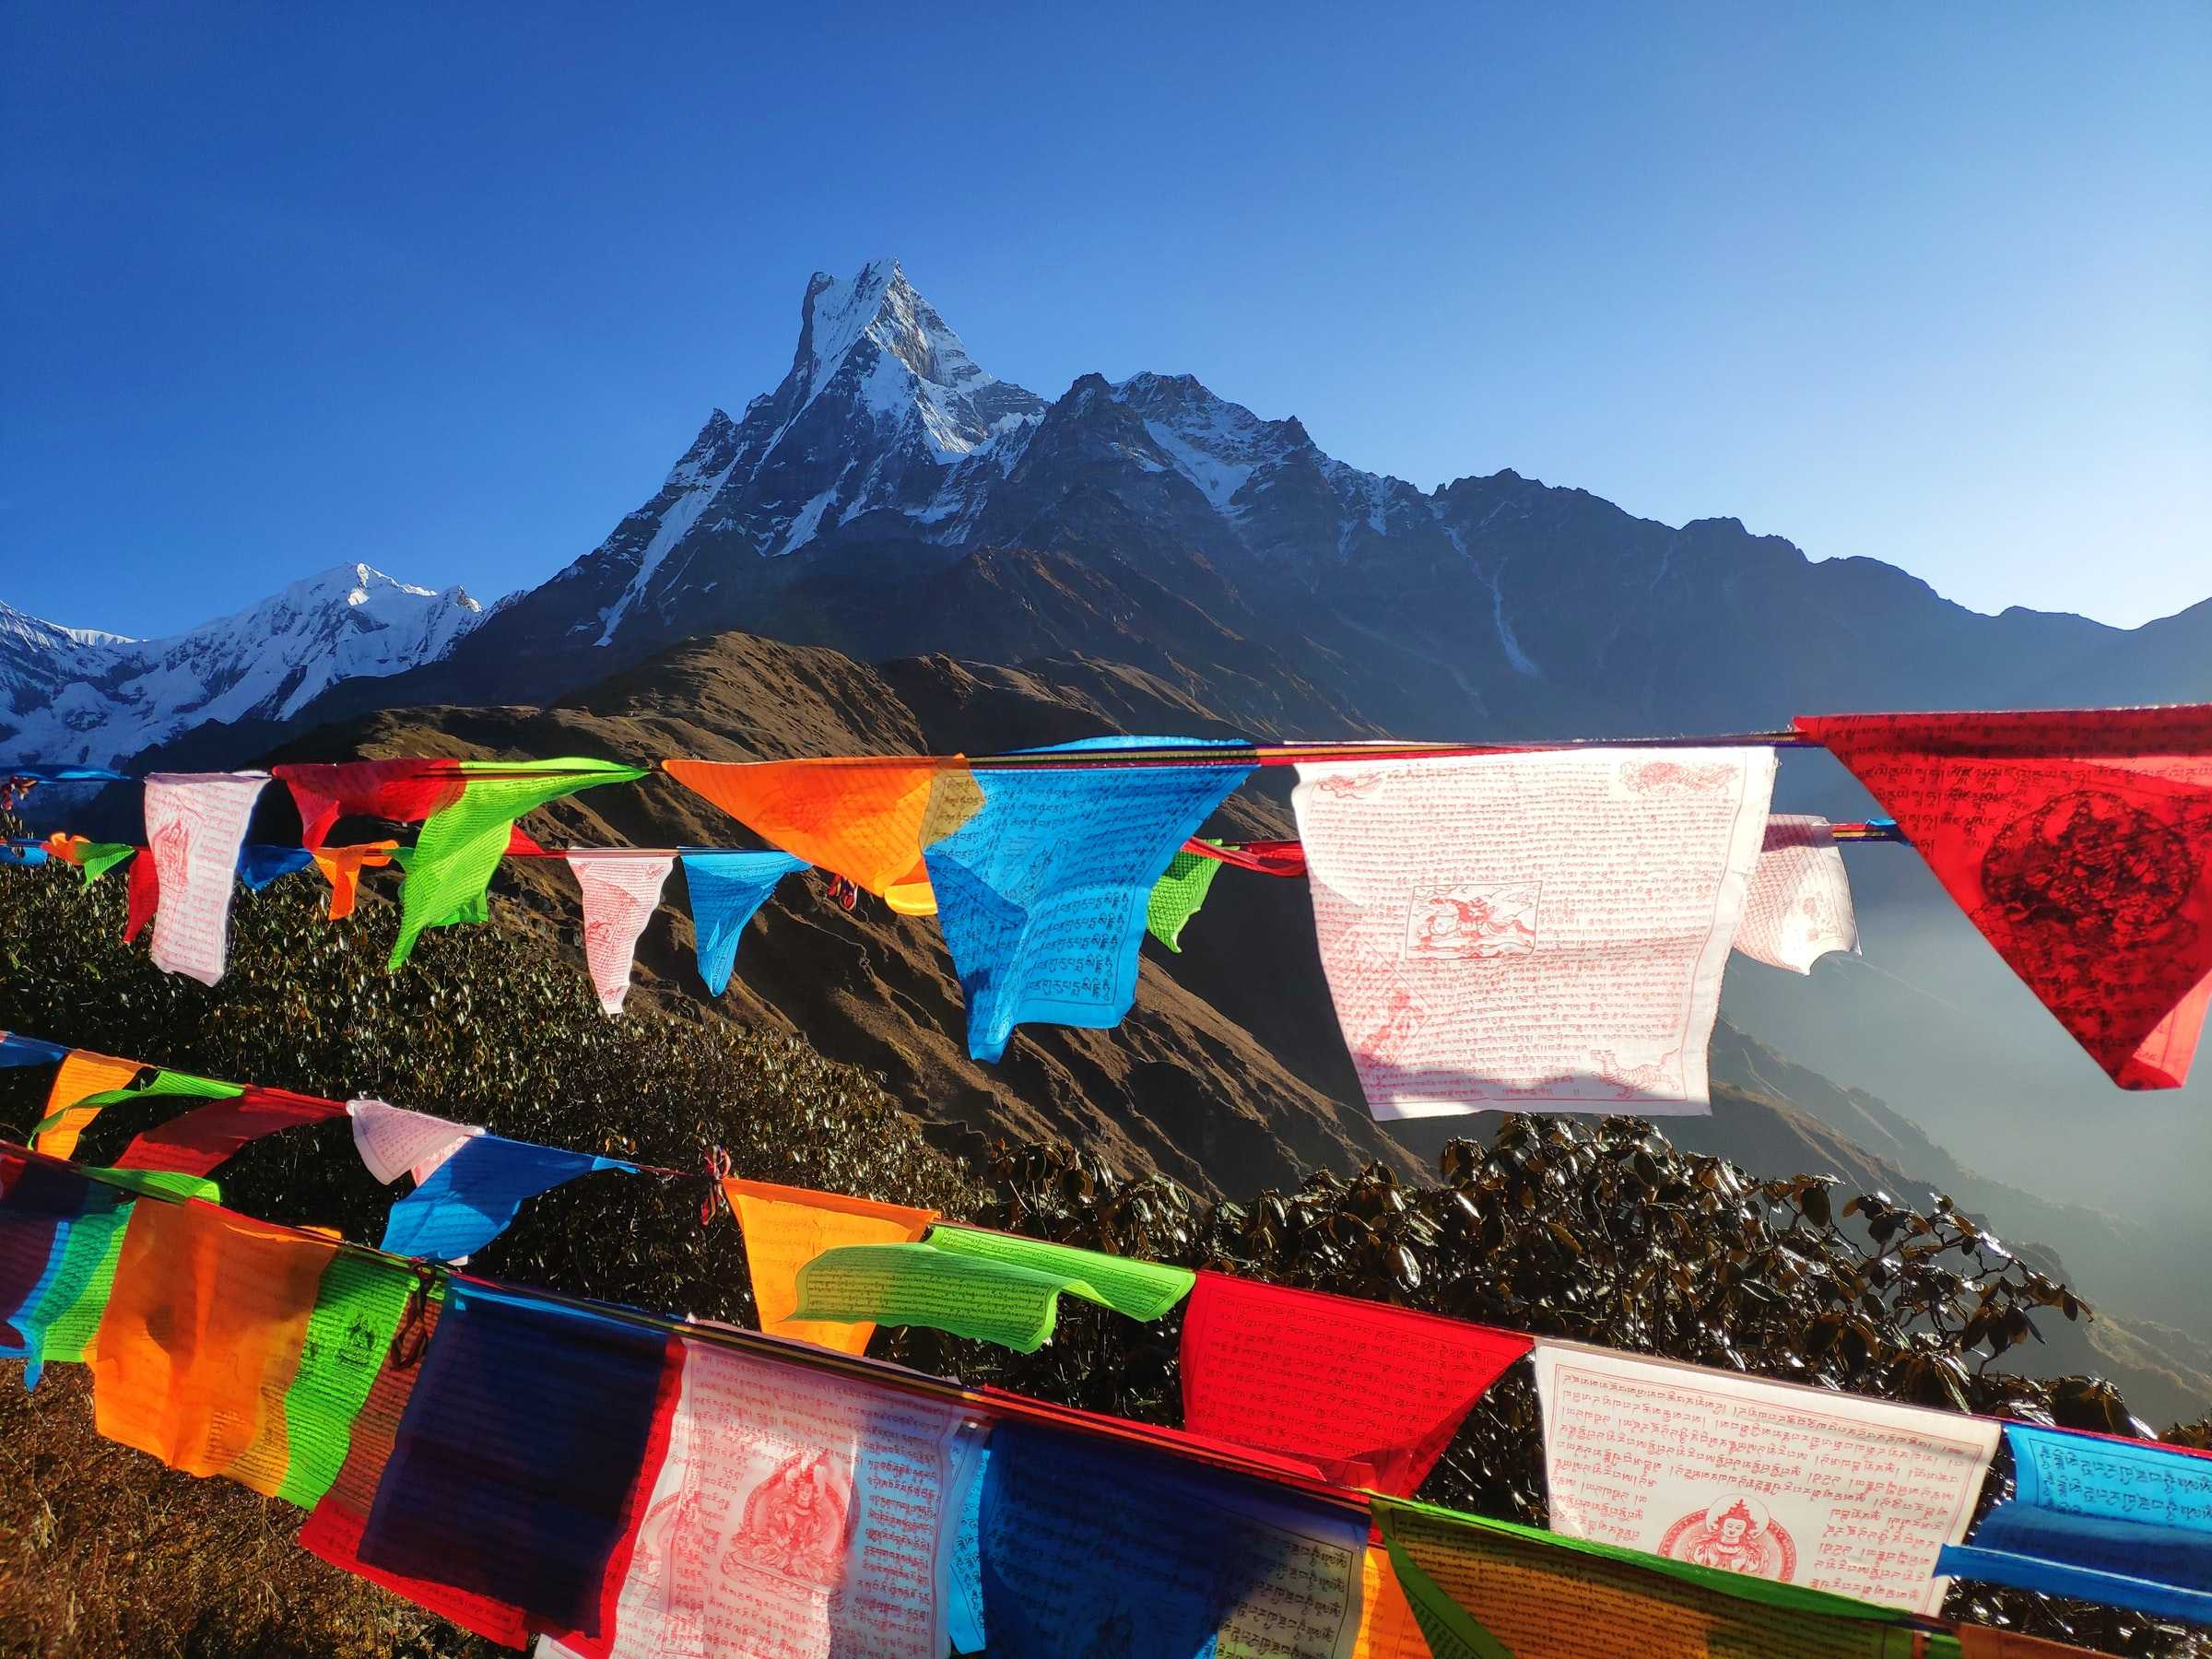 Snow capped peaks seen past the colorful buddhist prayer flags